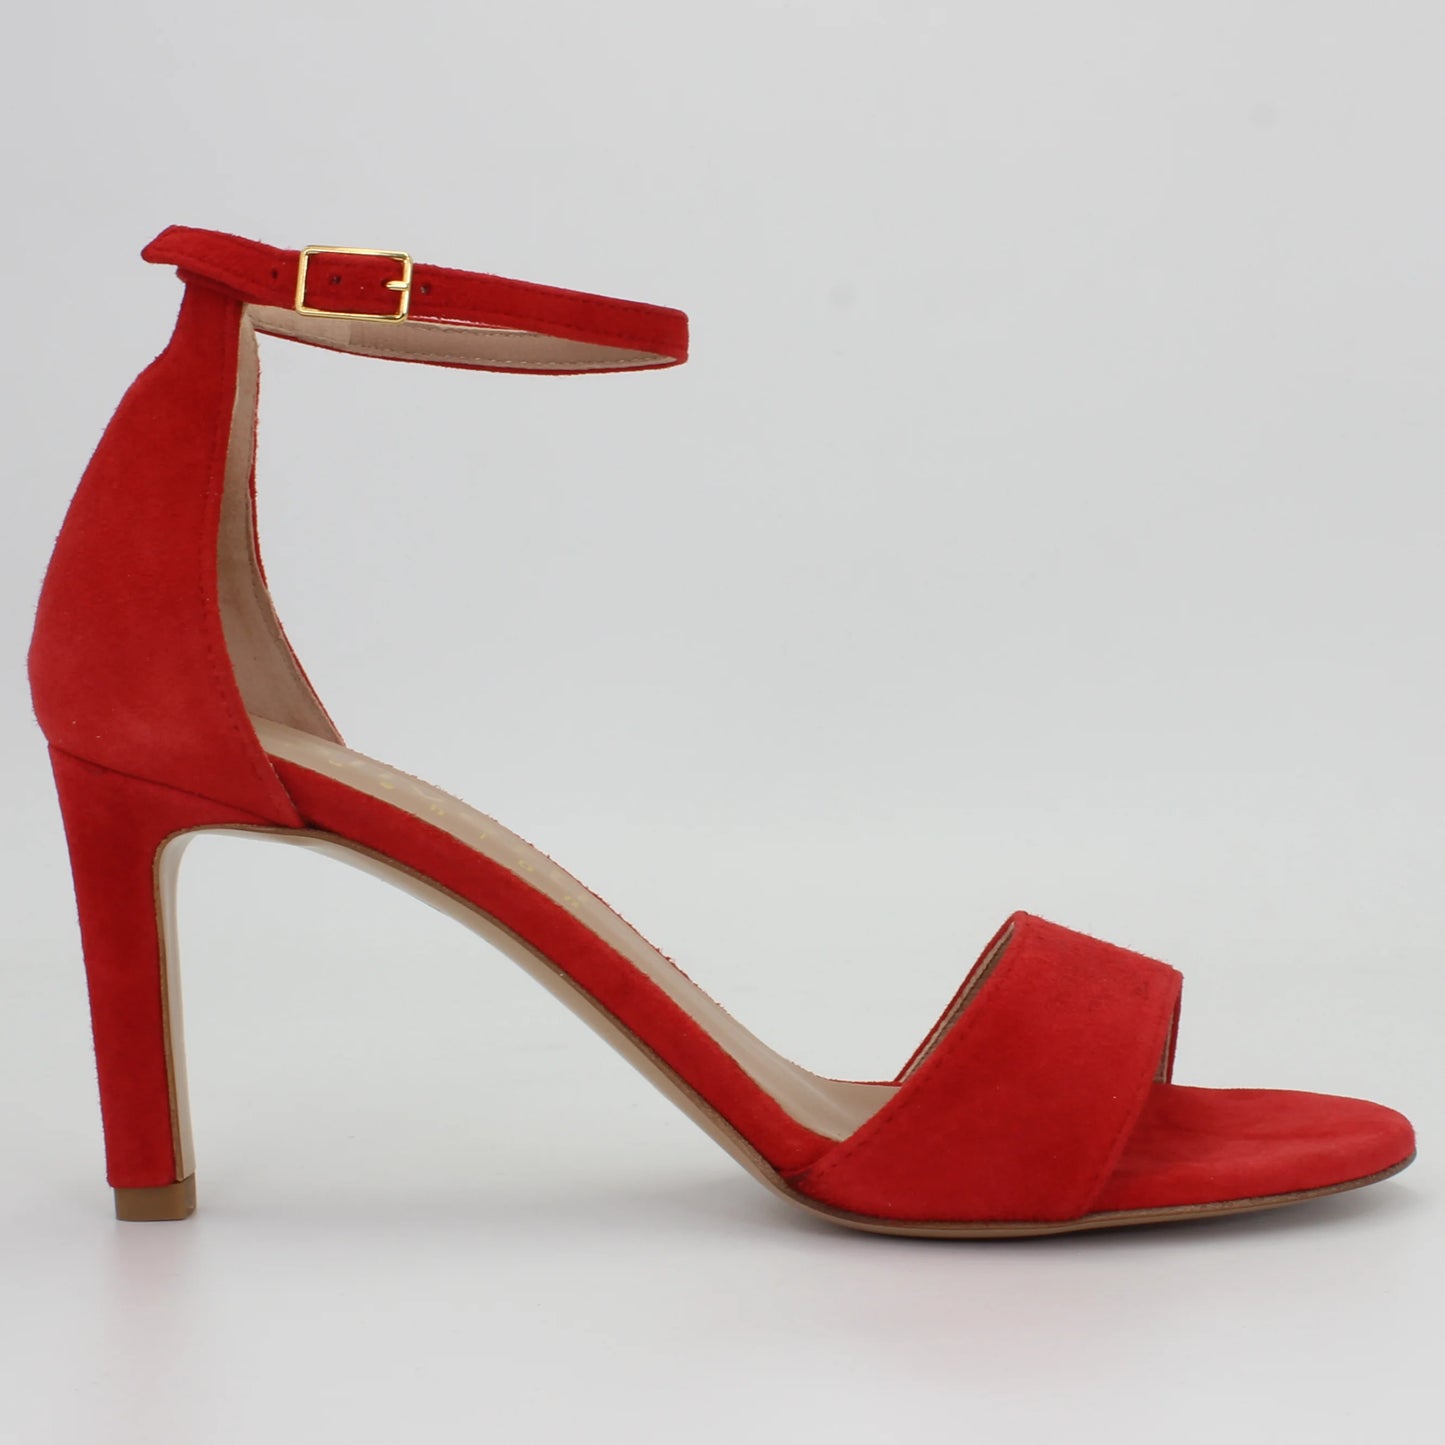 Shop Handmade Italian Leather high heel in red (ALCORY3) or browse our range of hand-made Italian shoes in leather or suede in-store at Aliverti Cape Town, or shop online. We deliver in South Africa & offer multiple payment plans as well as accept multiple safe & secure payment methods.